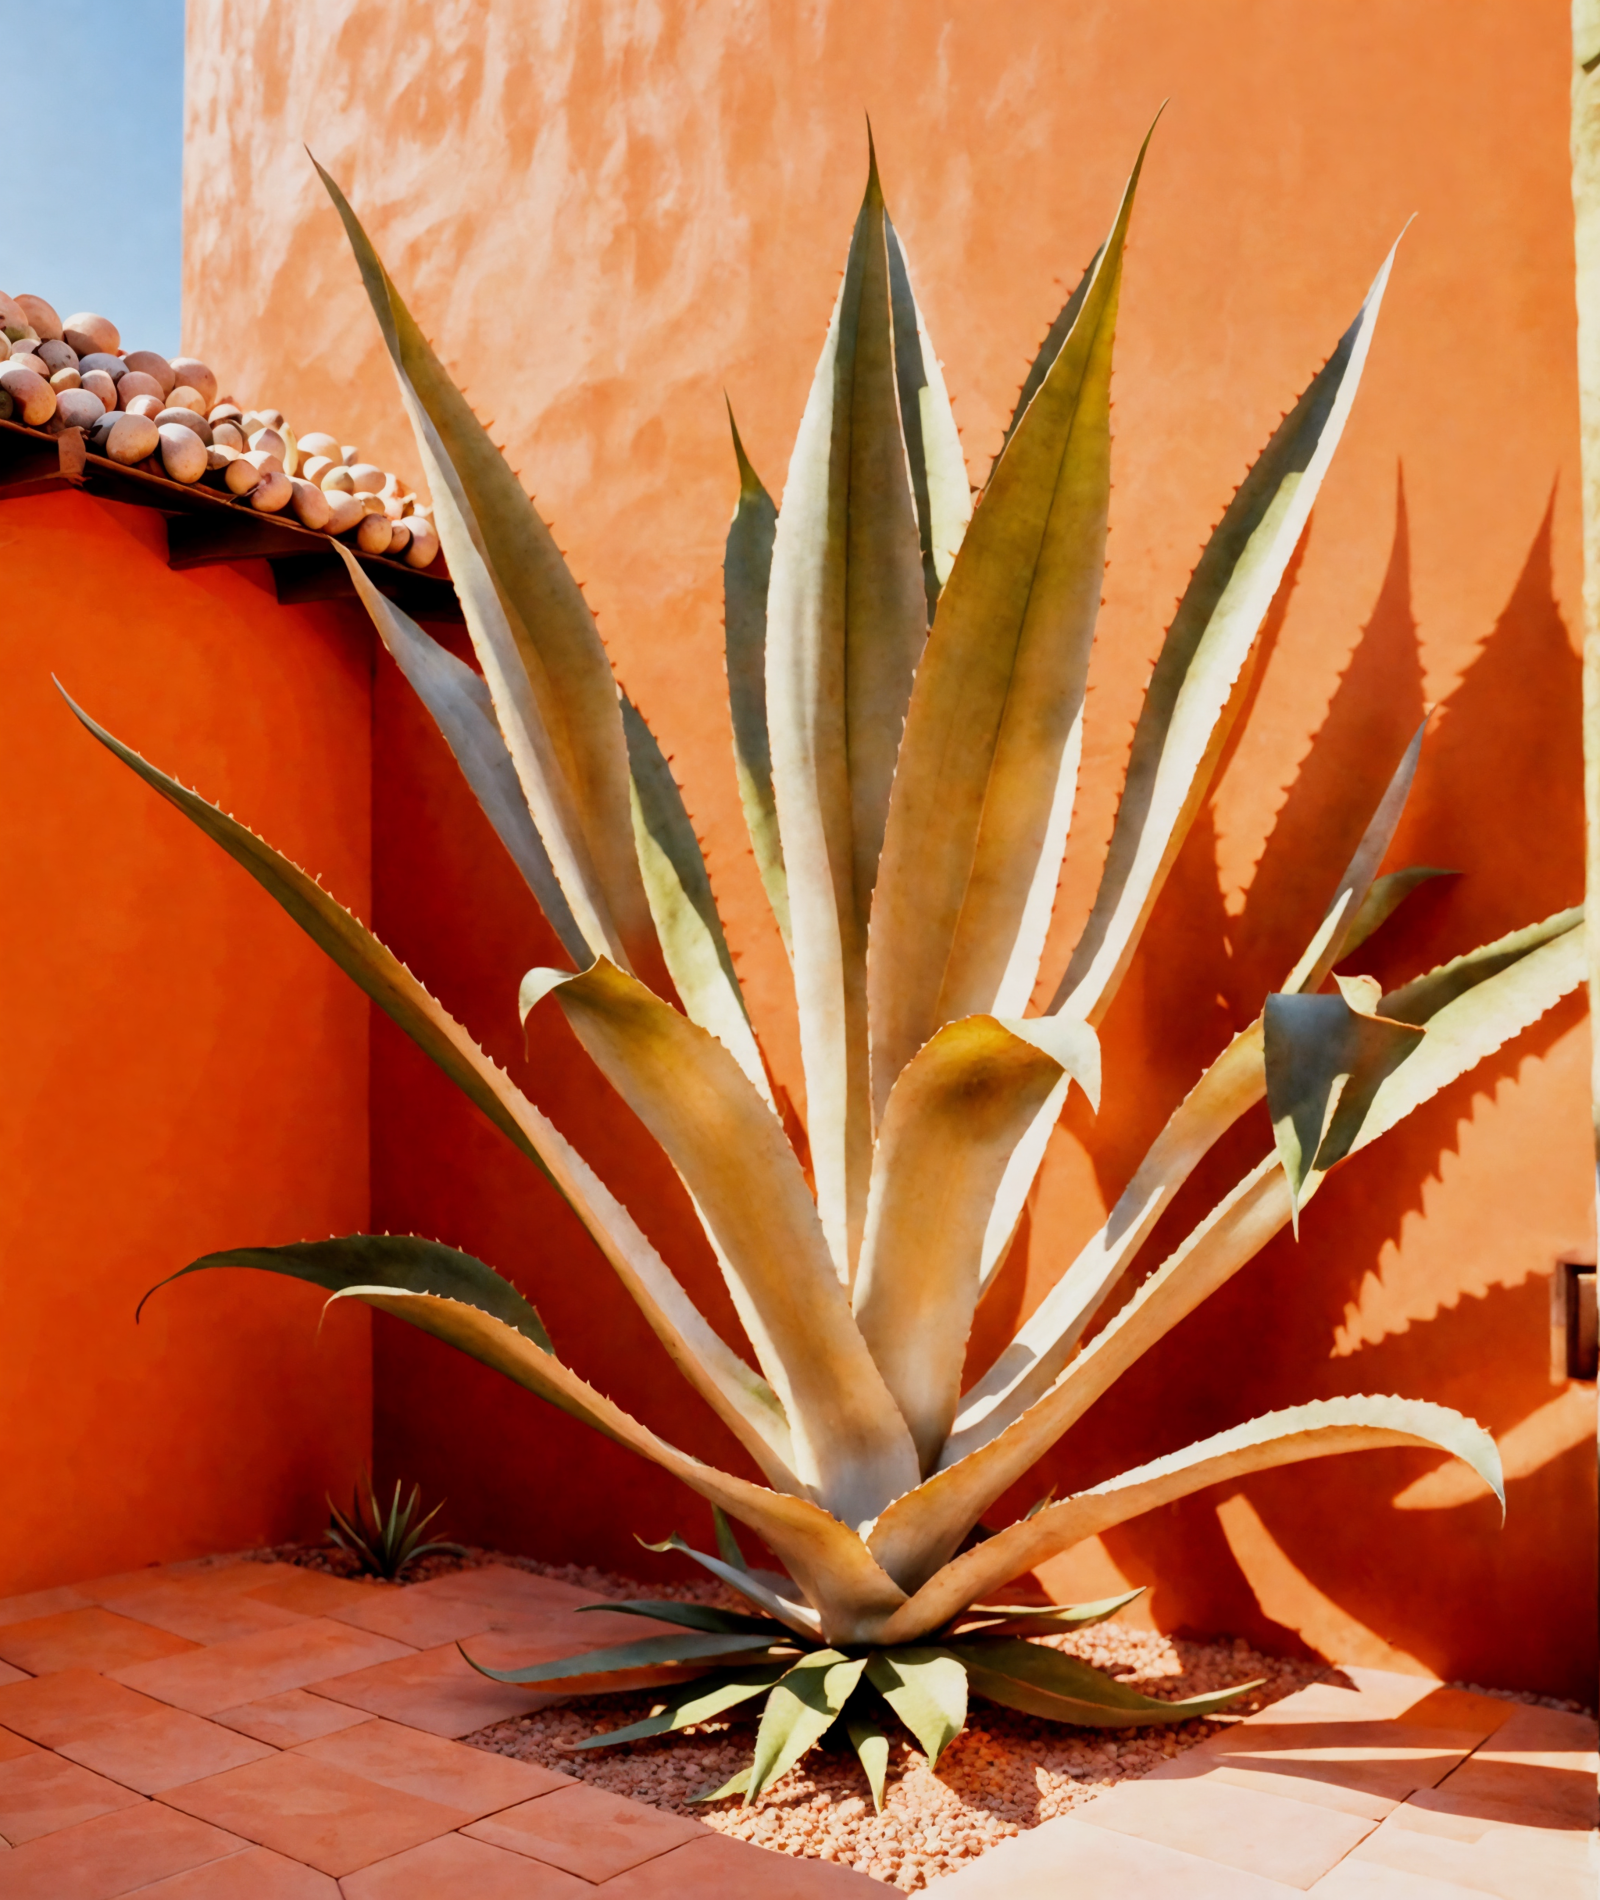 Large red Agave americana by a stone wall with smaller plants on the ground in bright sunlight.